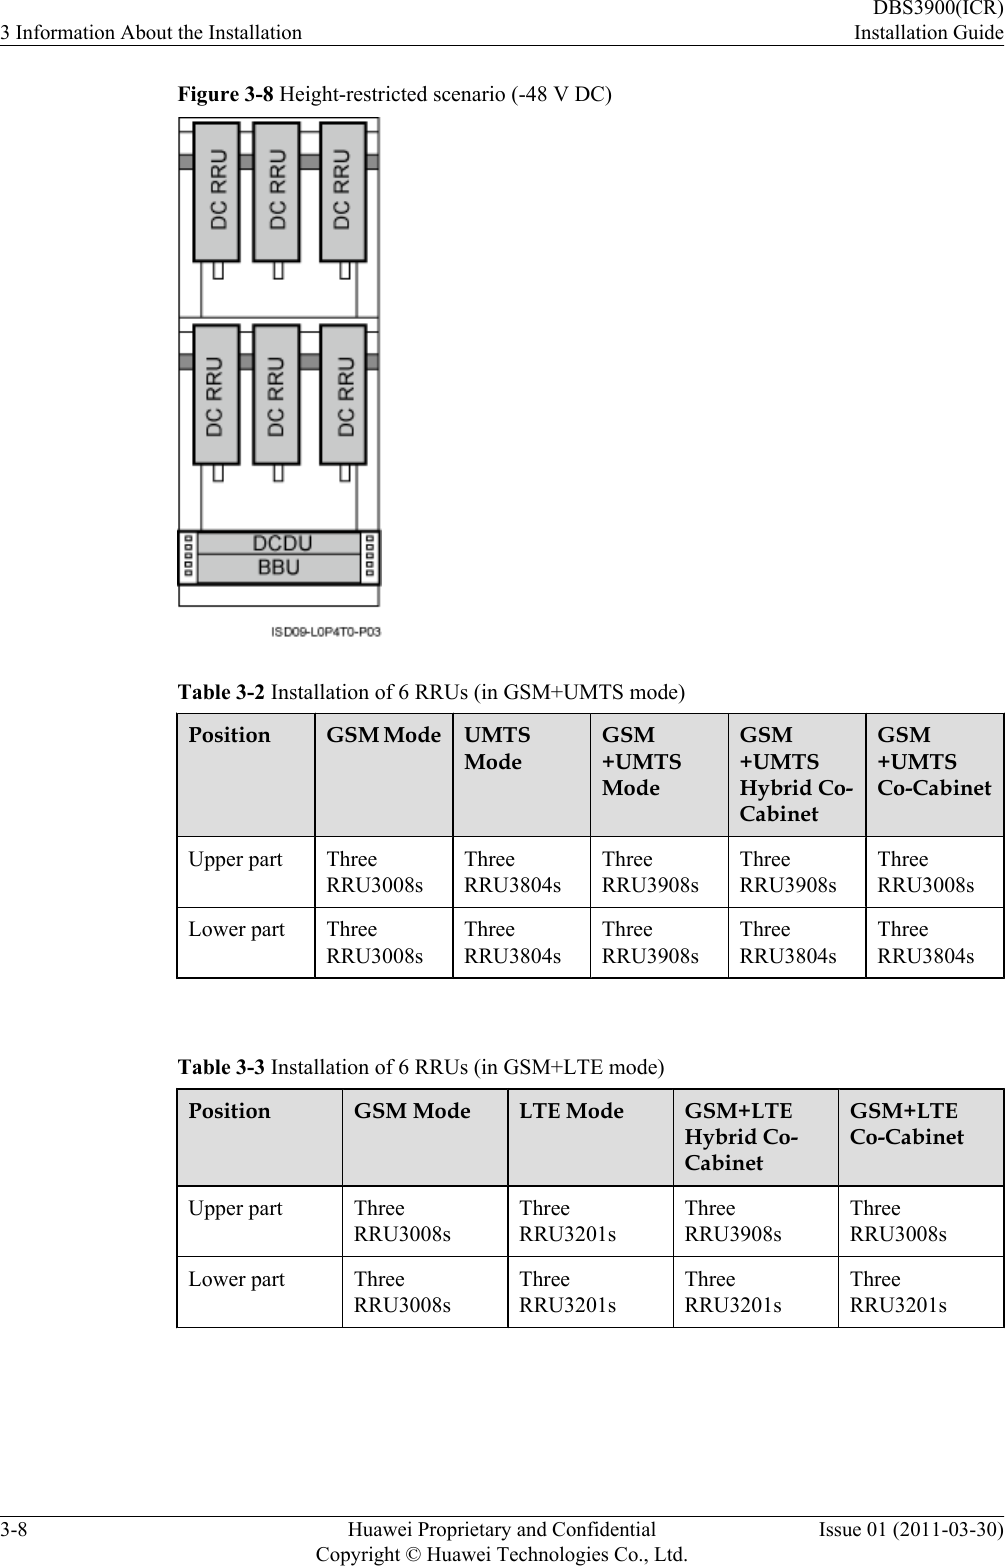 Figure 3-8 Height-restricted scenario (-48 V DC)Table 3-2 Installation of 6 RRUs (in GSM+UMTS mode)Position GSM Mode UMTSModeGSM+UMTSModeGSM+UMTSHybrid Co-CabinetGSM+UMTSCo-CabinetUpper part ThreeRRU3008sThreeRRU3804sThreeRRU3908sThreeRRU3908sThreeRRU3008sLower part ThreeRRU3008sThreeRRU3804sThreeRRU3908sThreeRRU3804sThreeRRU3804s Table 3-3 Installation of 6 RRUs (in GSM+LTE mode)Position GSM Mode LTE Mode GSM+LTEHybrid Co-CabinetGSM+LTECo-CabinetUpper part ThreeRRU3008sThreeRRU3201sThreeRRU3908sThreeRRU3008sLower part ThreeRRU3008sThreeRRU3201sThreeRRU3201sThreeRRU3201s 3 Information About the InstallationDBS3900(ICR)Installation Guide3-8 Huawei Proprietary and ConfidentialCopyright © Huawei Technologies Co., Ltd.Issue 01 (2011-03-30)